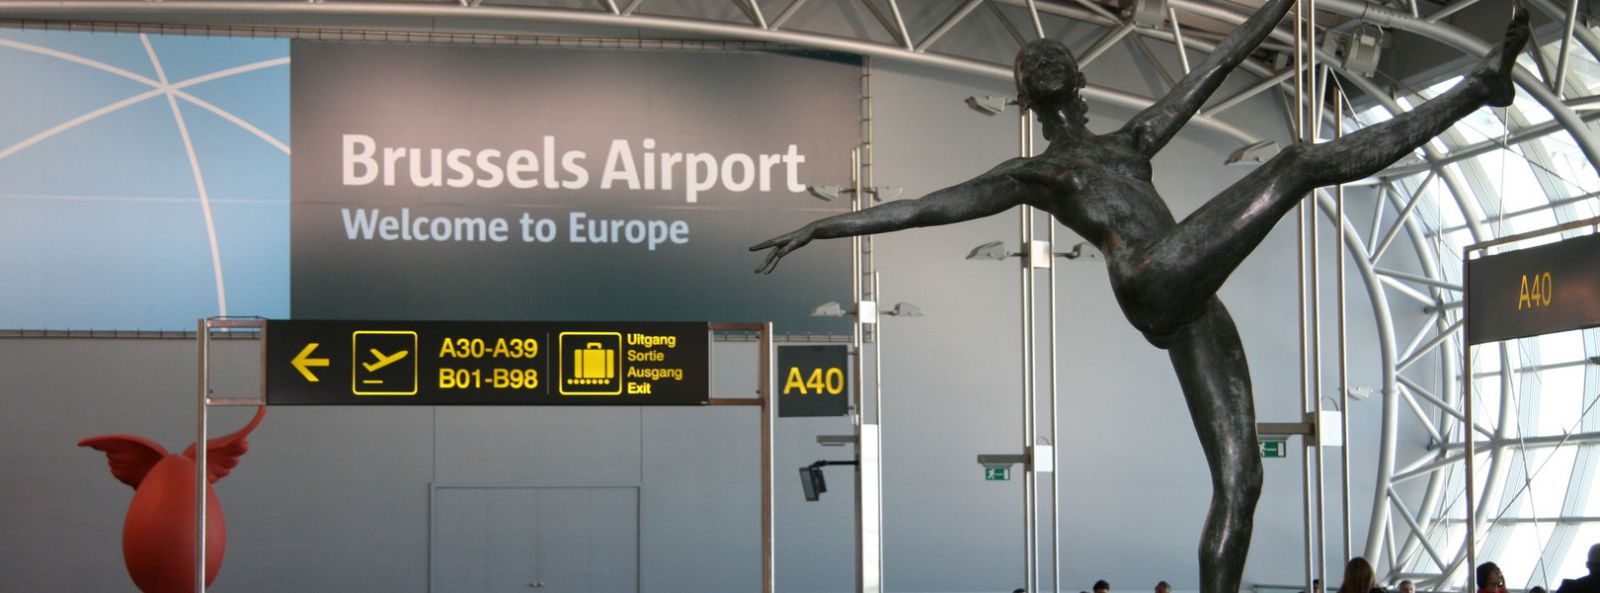 brussels airport taxi transfers and shuttle service